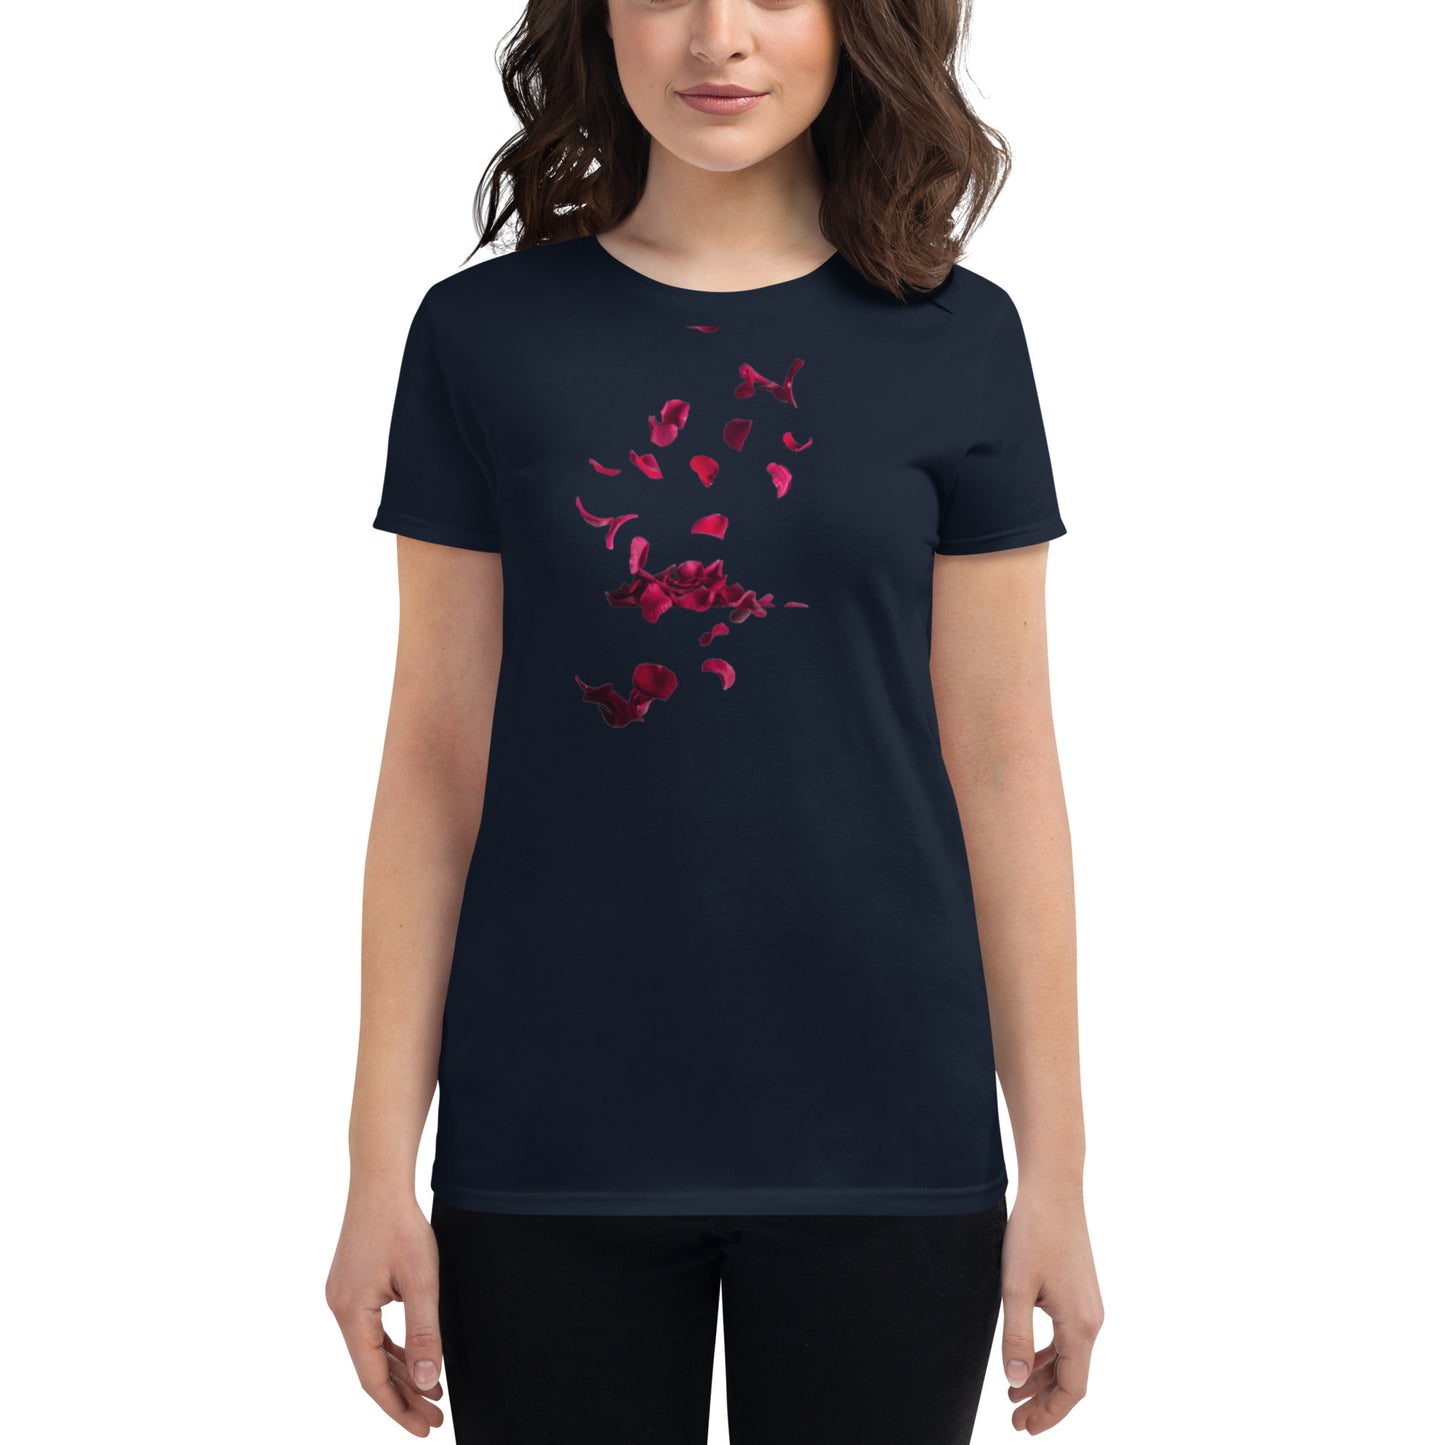 Exquisite Flower-Printed Short Sleeve T-Shirt for Women | Pure Cotton and Blended Varieties